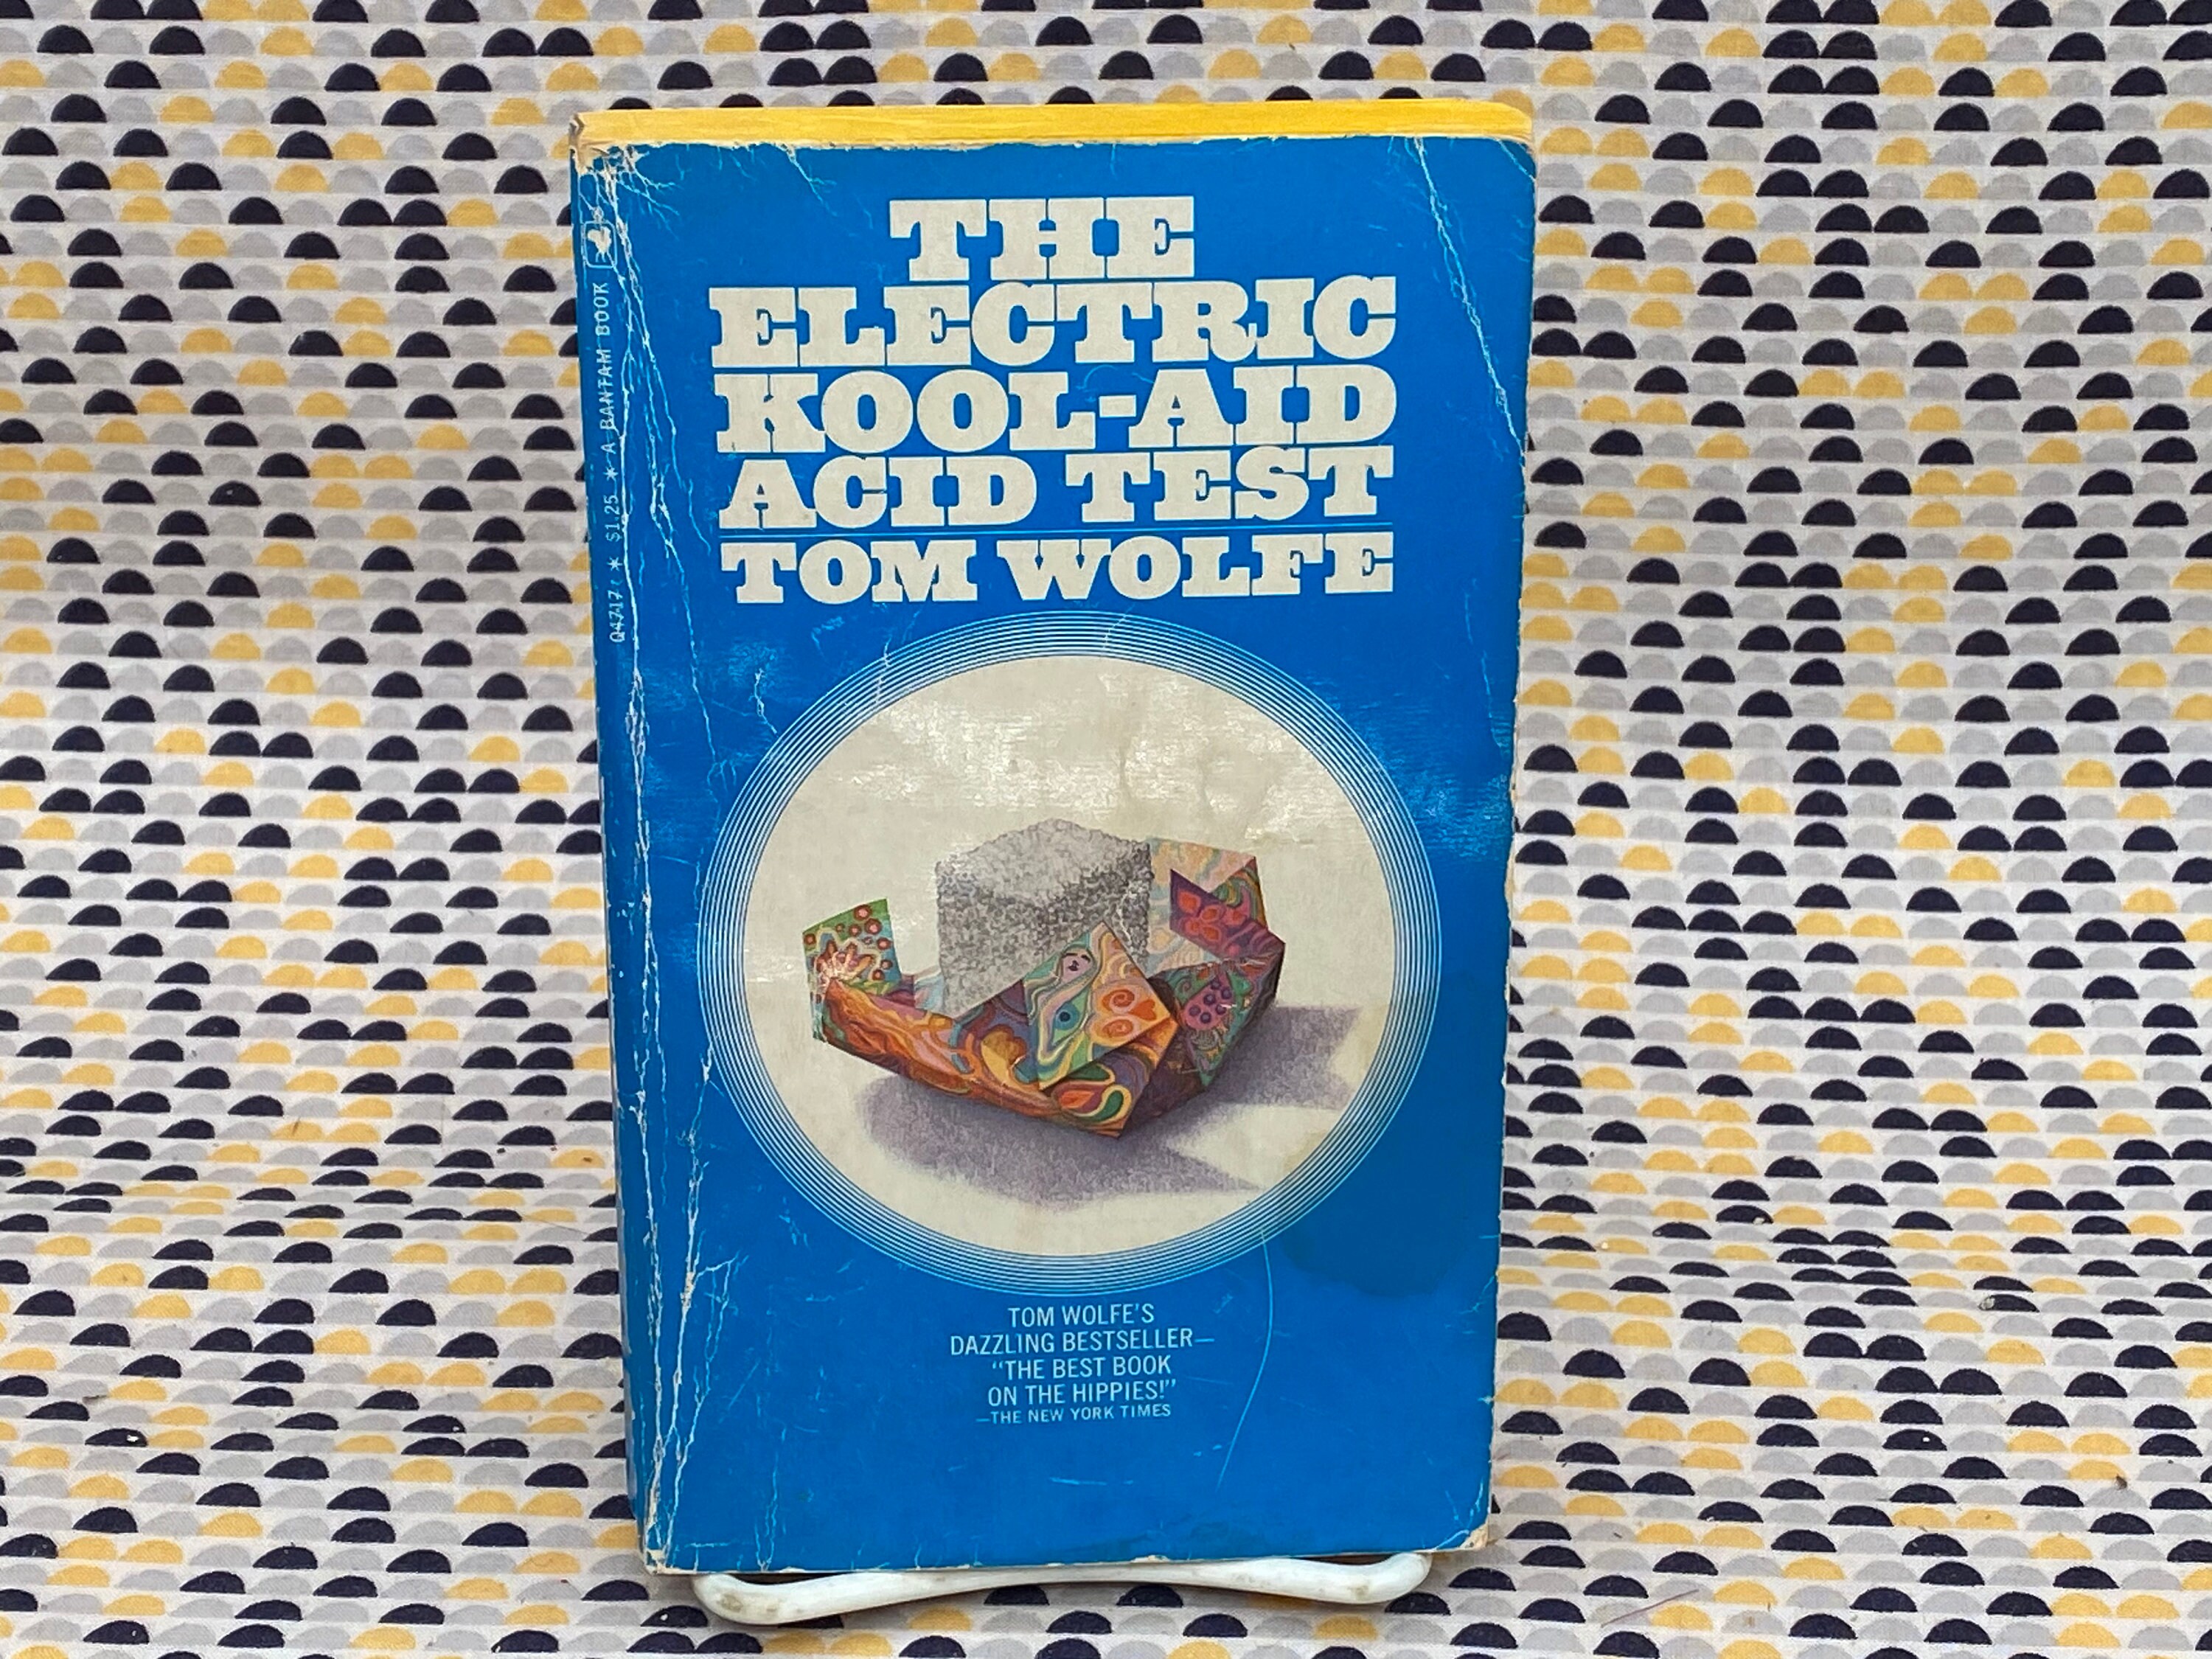 The Right Stuff by Tom Wolfe - Penguin Books New Zealand